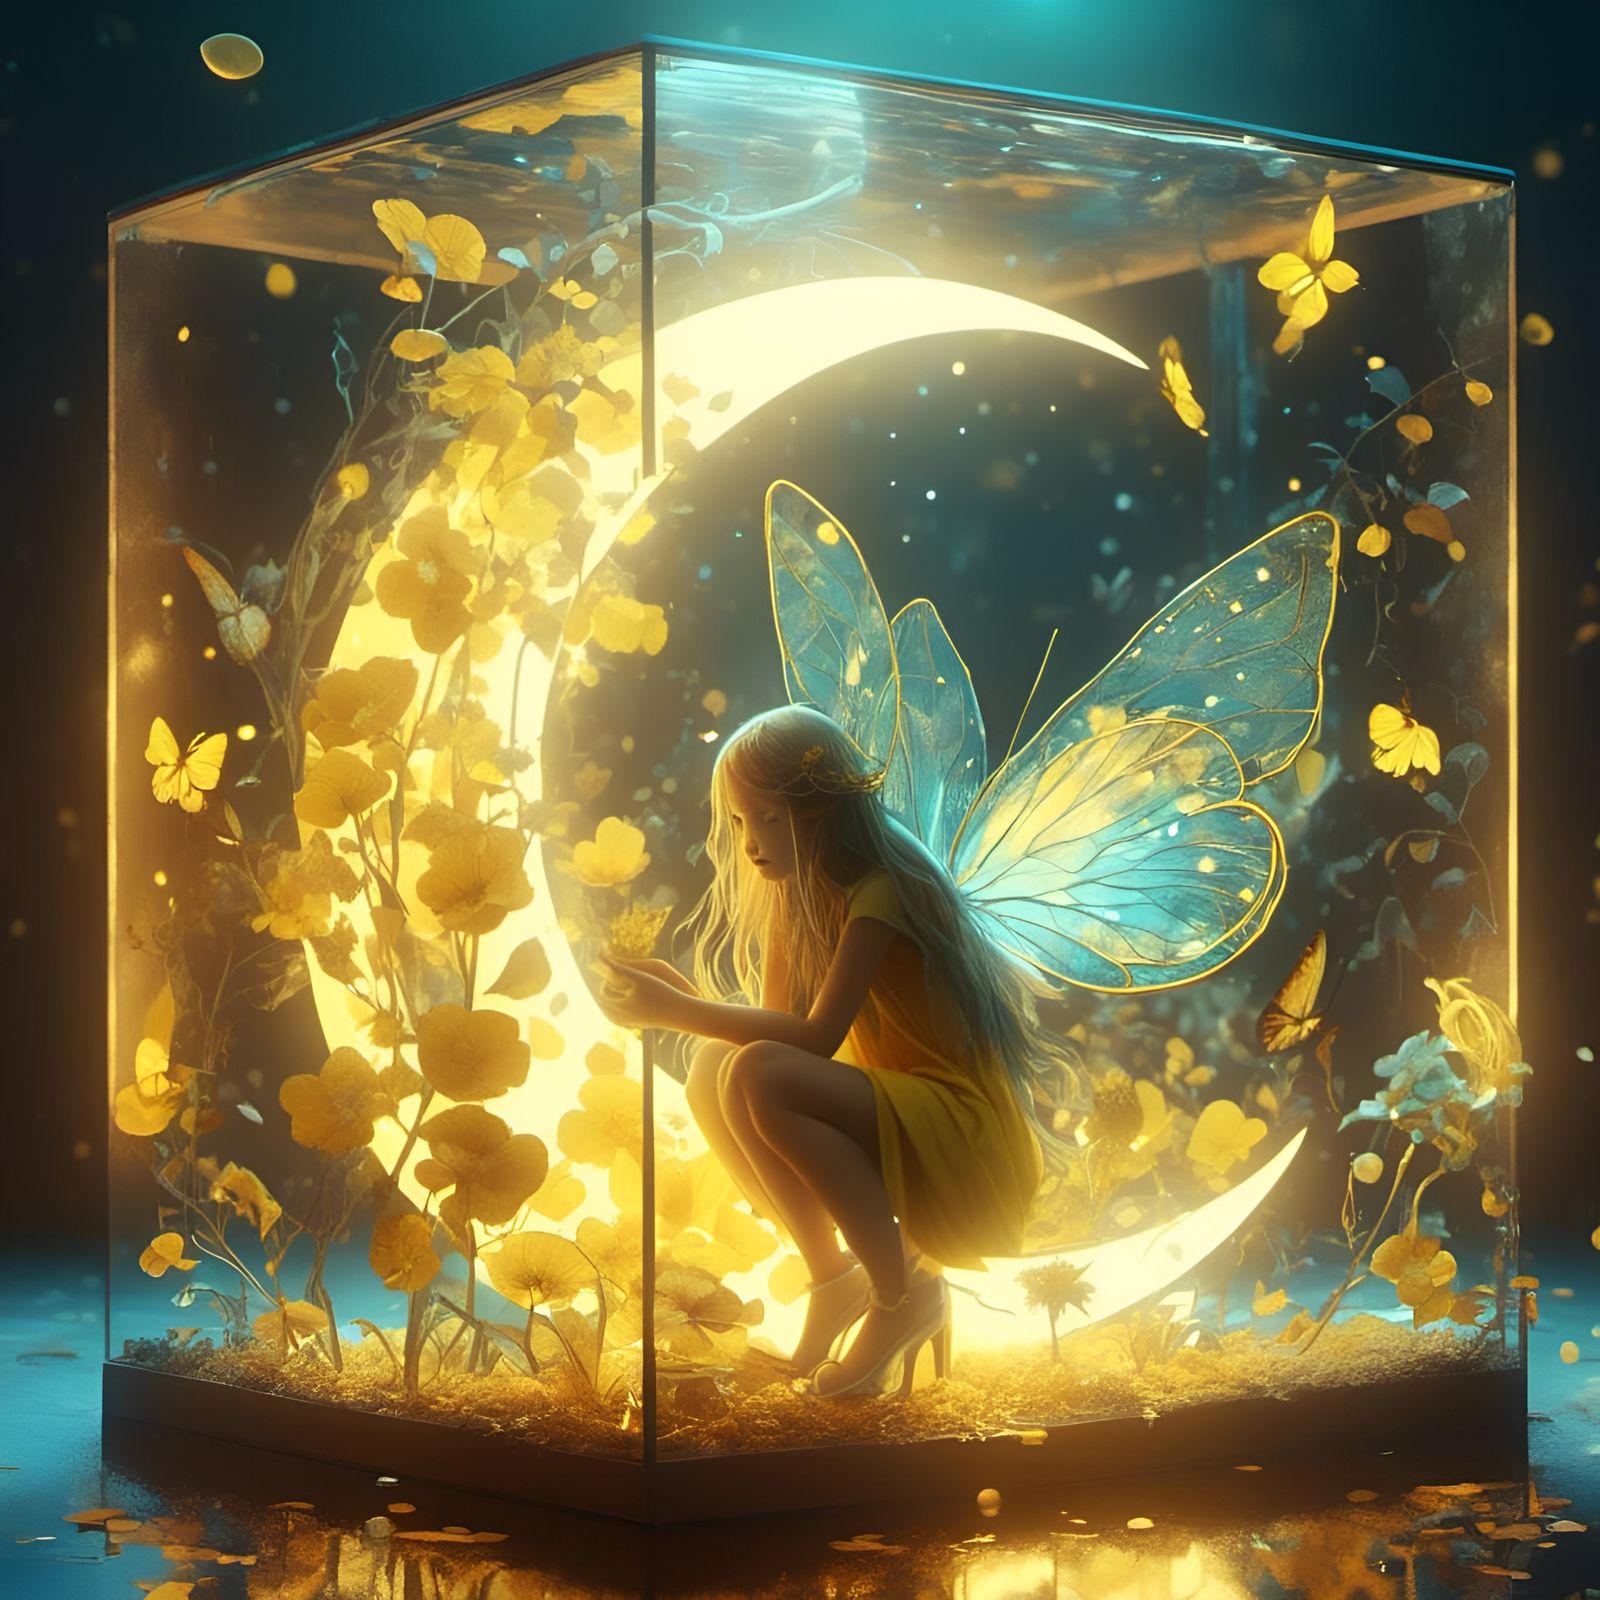 the trapped fairy over the moon